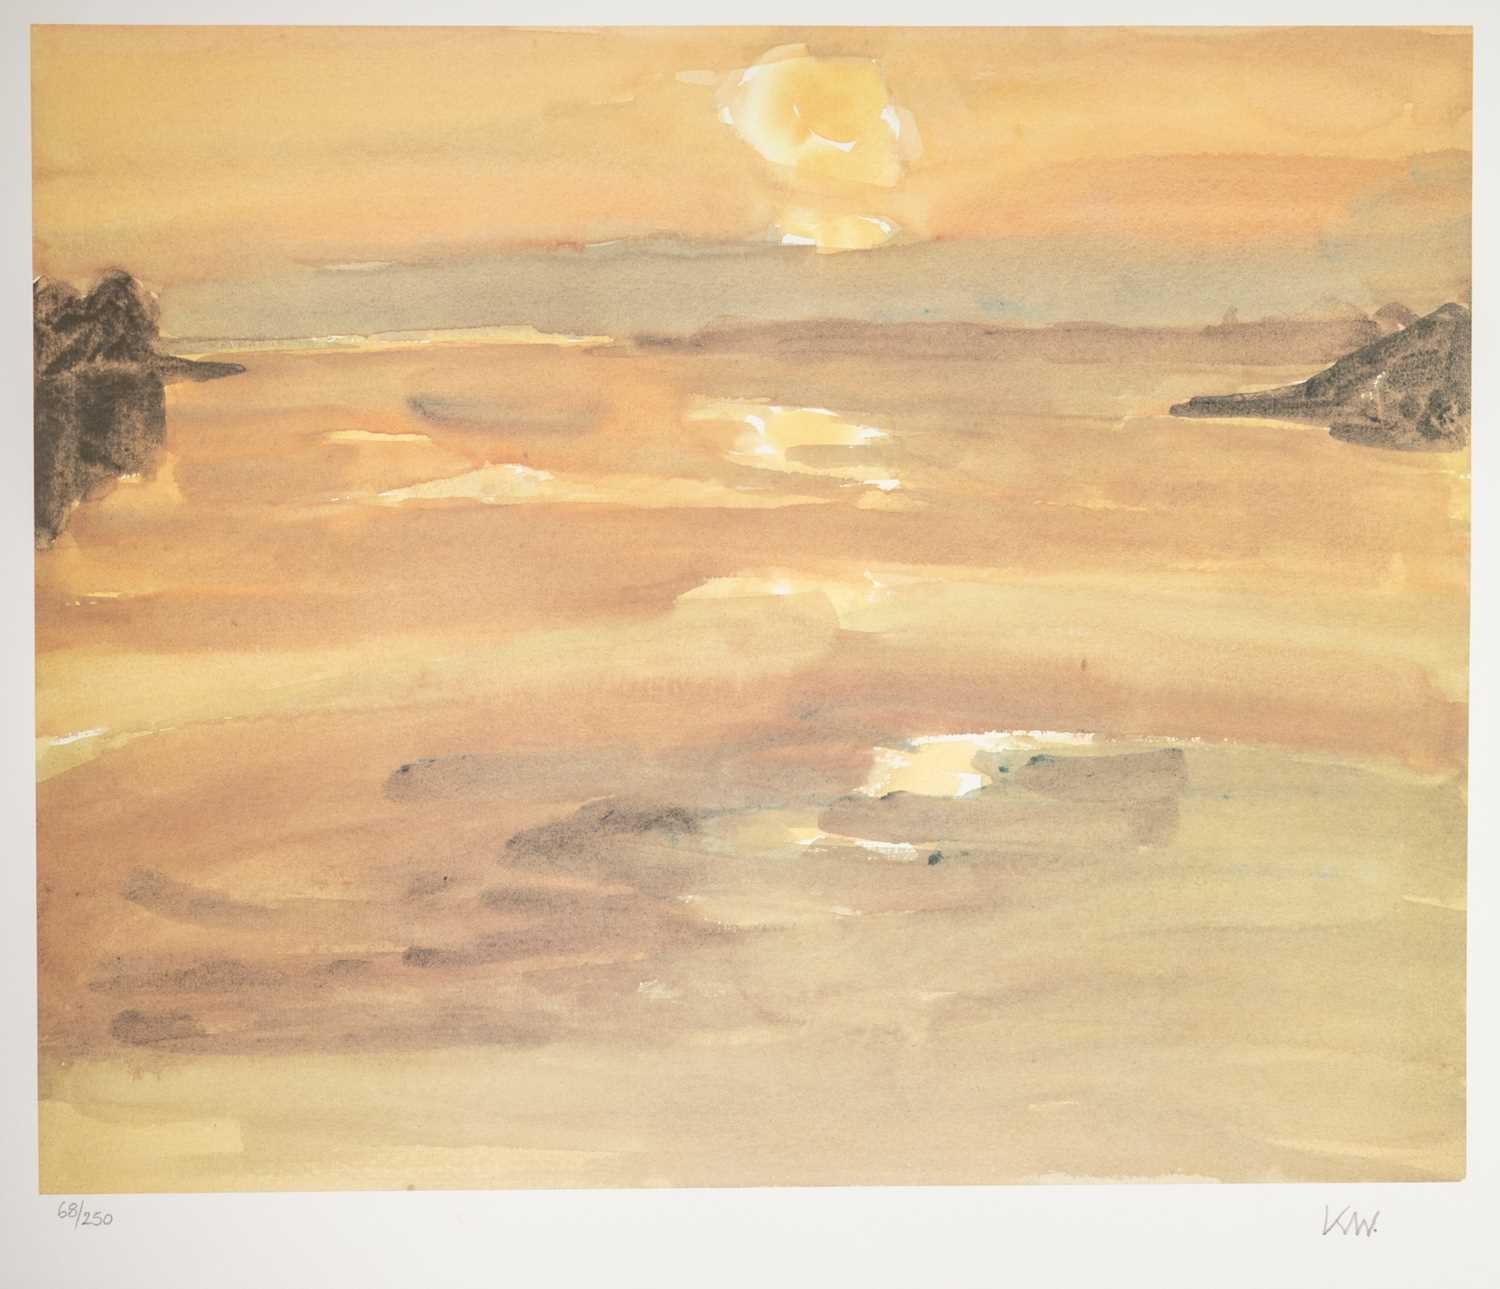 ‡ SIR KYFFIN WILLIAMS RA limited edition (68/250) print - sunset at Moel y Don on the Menai